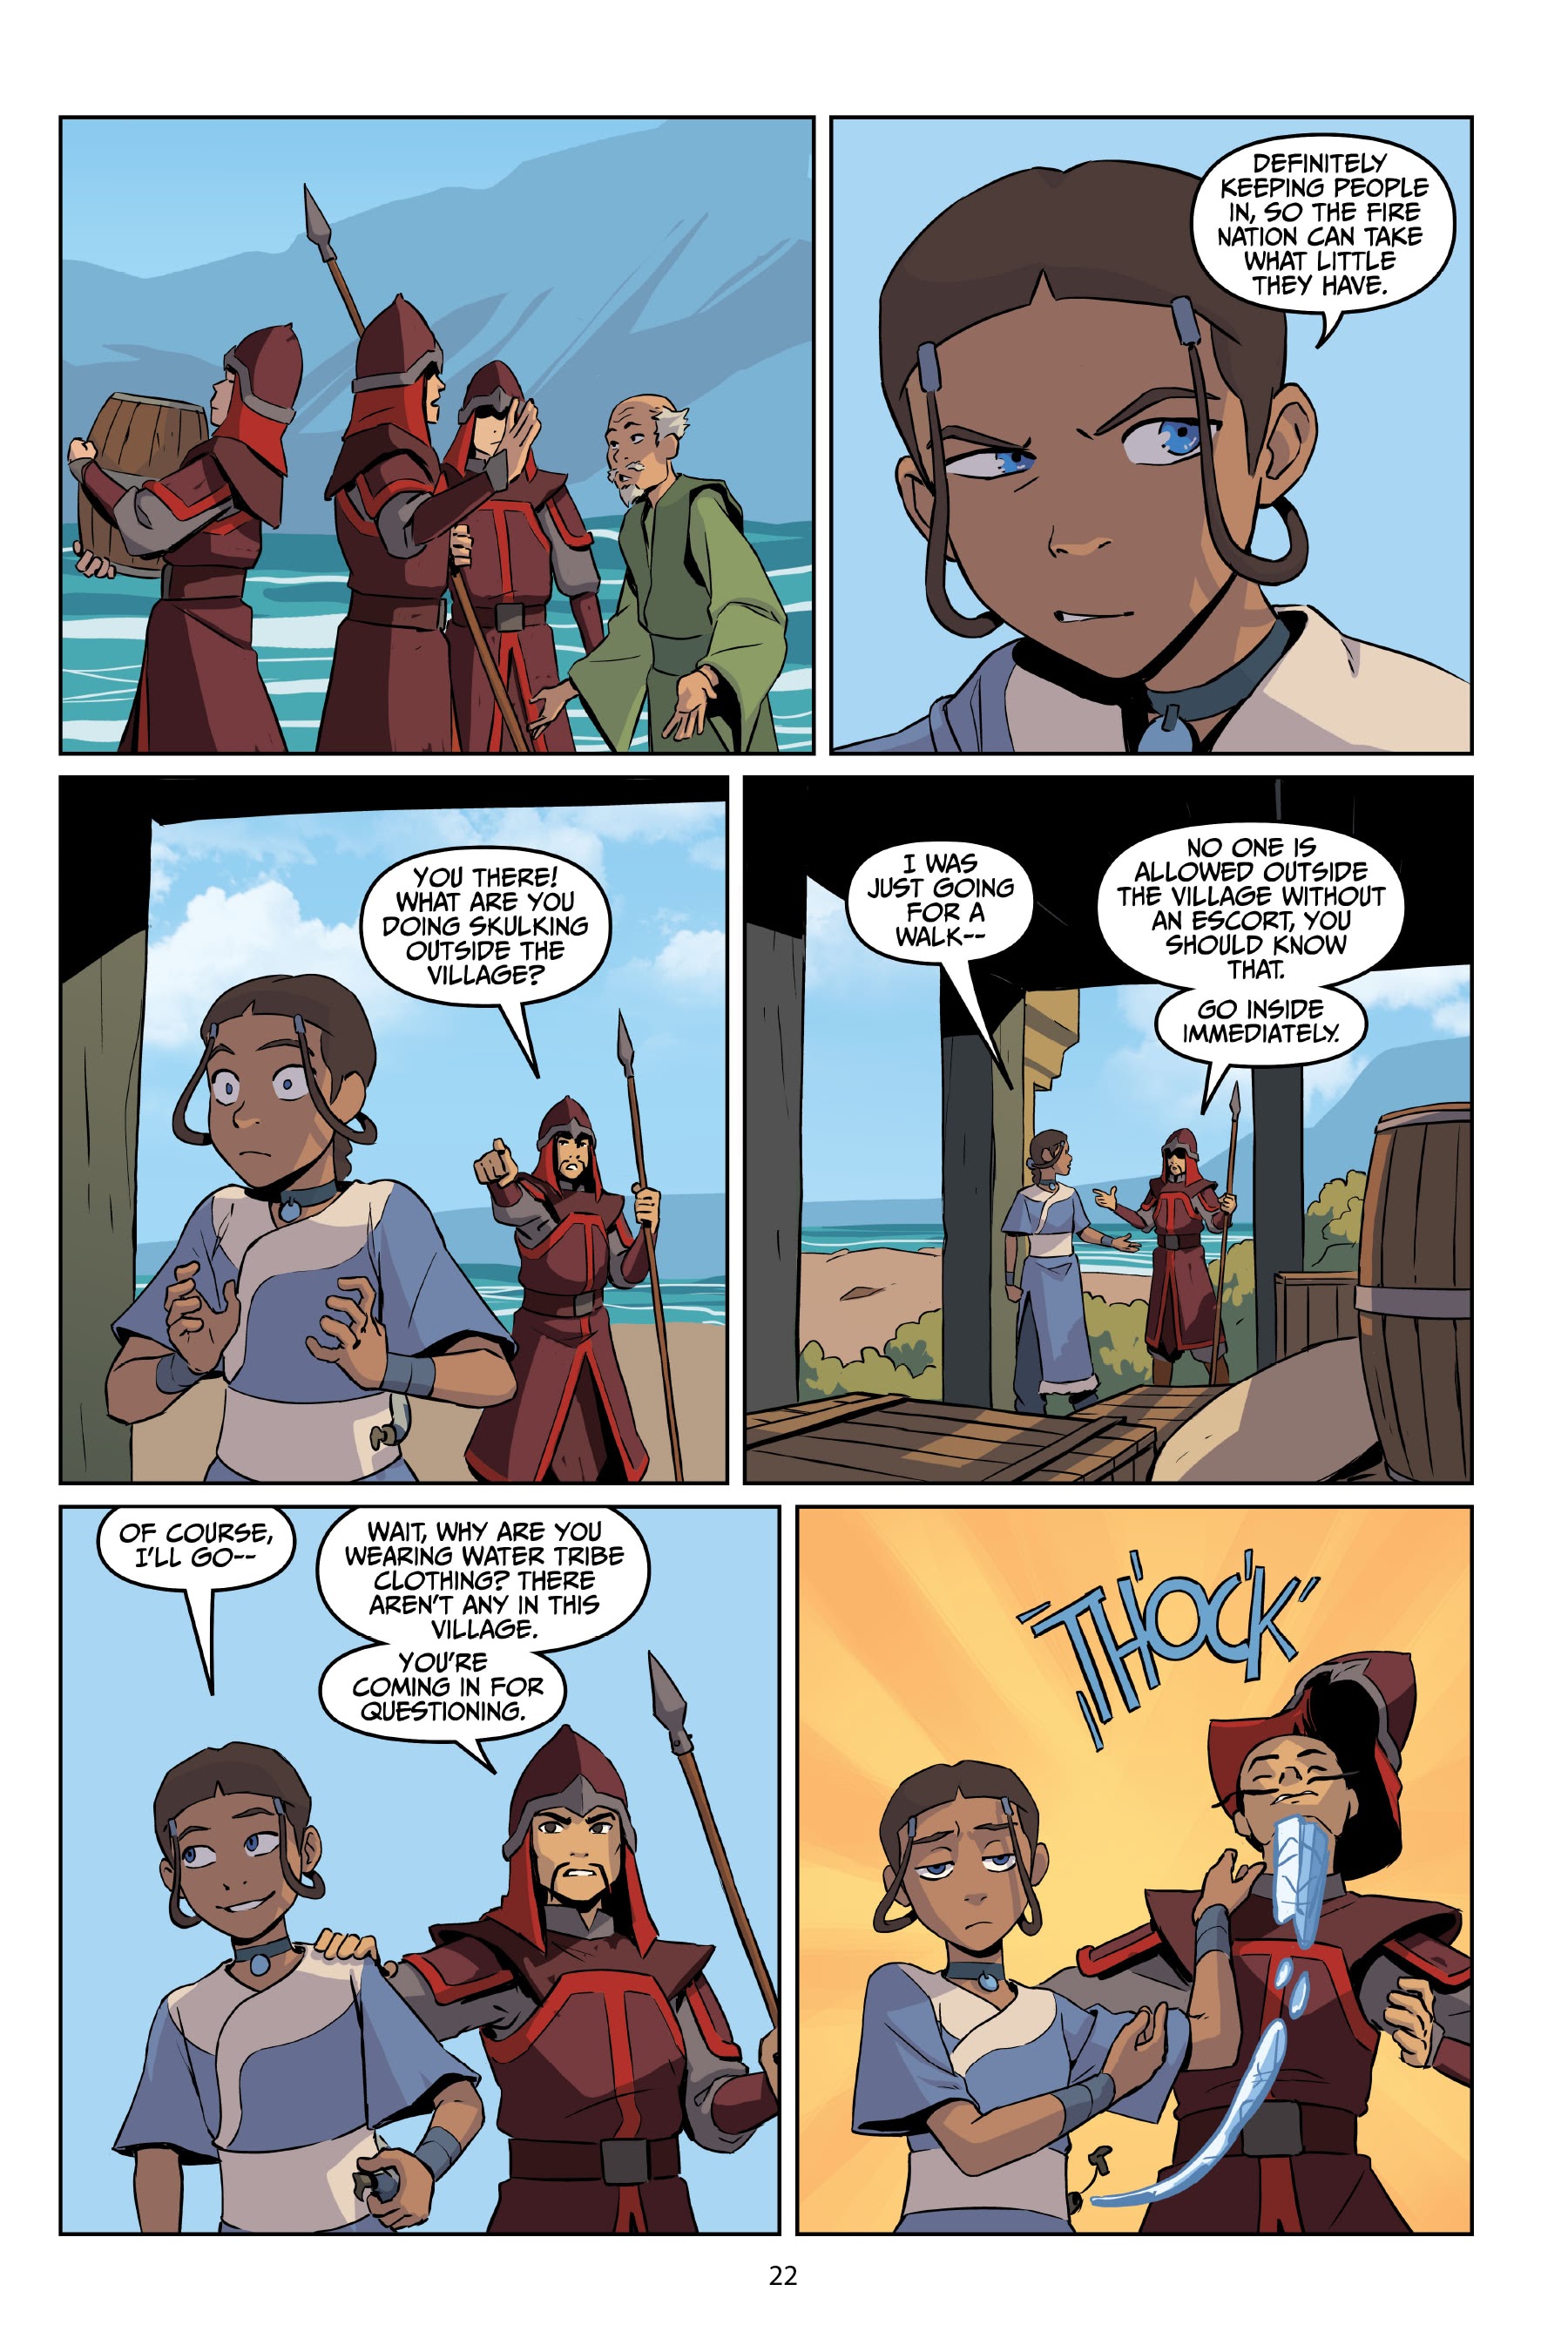 Read online Avatar: The Last Airbender—Katara and the Pirate's Silver comic -  Issue # TPB - 23